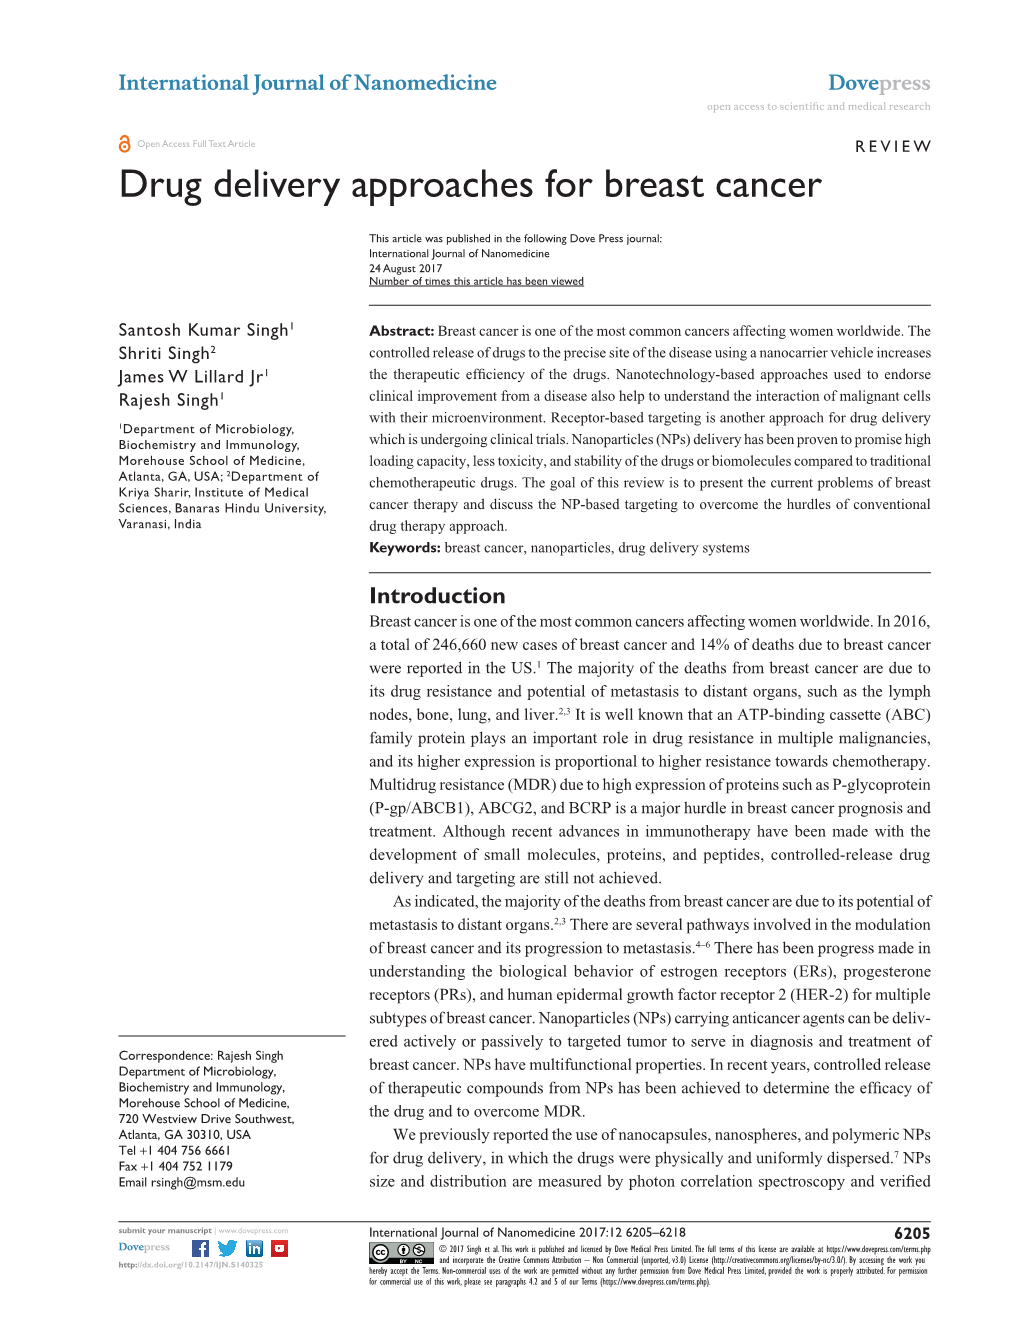 Drug Delivery Approaches for Breast Cancer